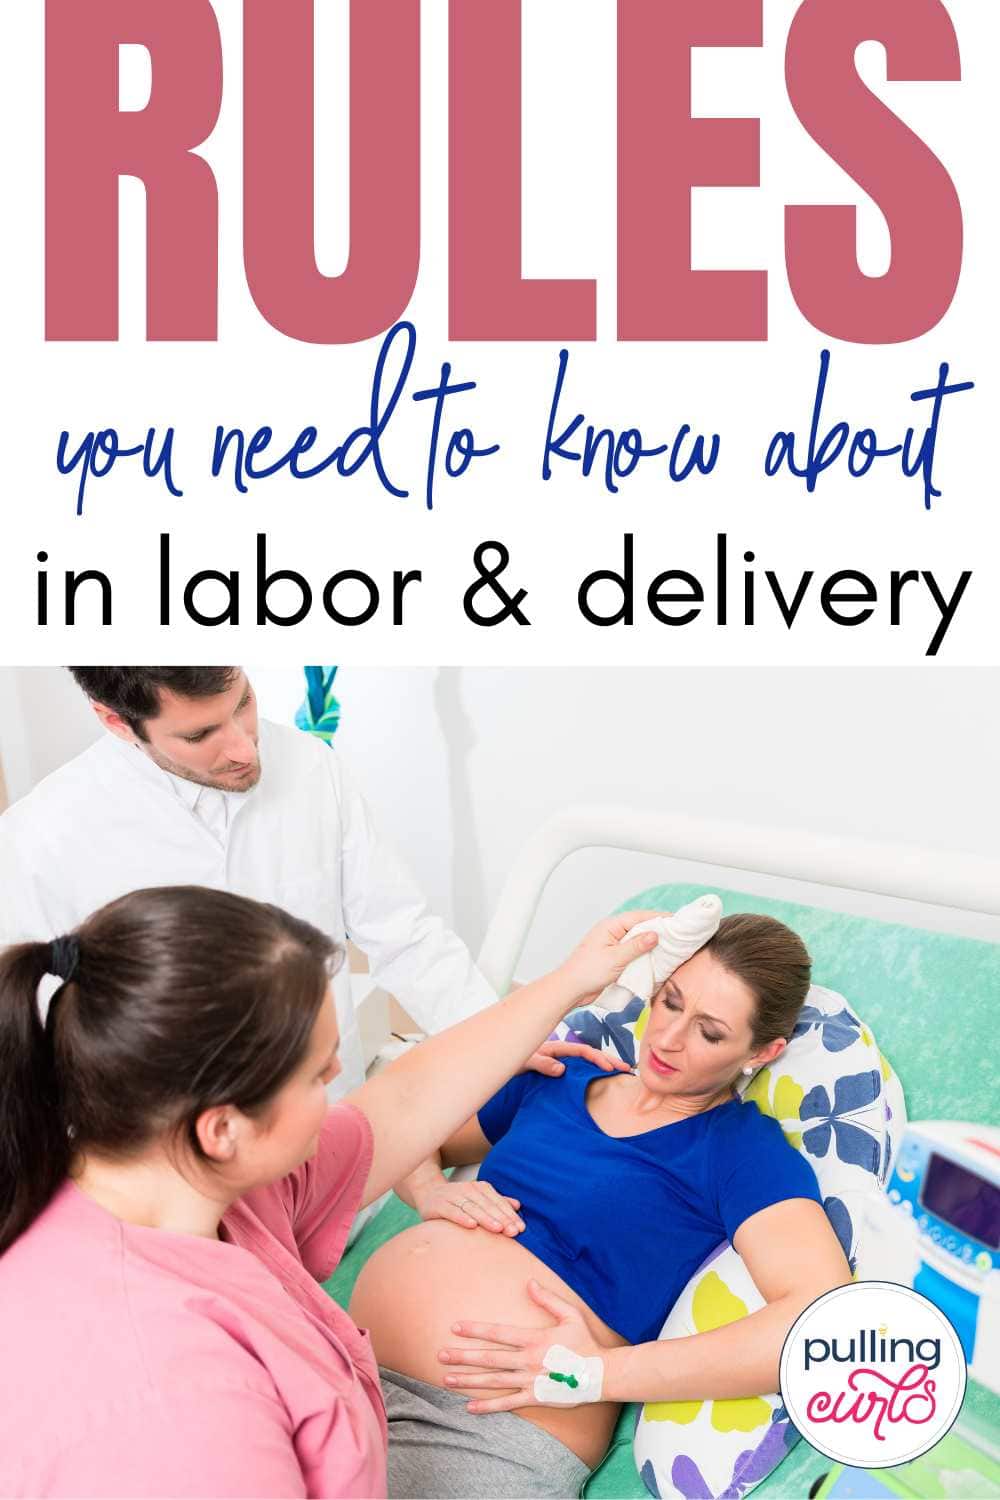 Have you ever wondered what really happens inside a delivery room? Let's debunk common labor room myths and reveal the thrilling reality. This pin lures you into the captivating world of labor and delivery, separating truth from fiction. via @pullingcurls